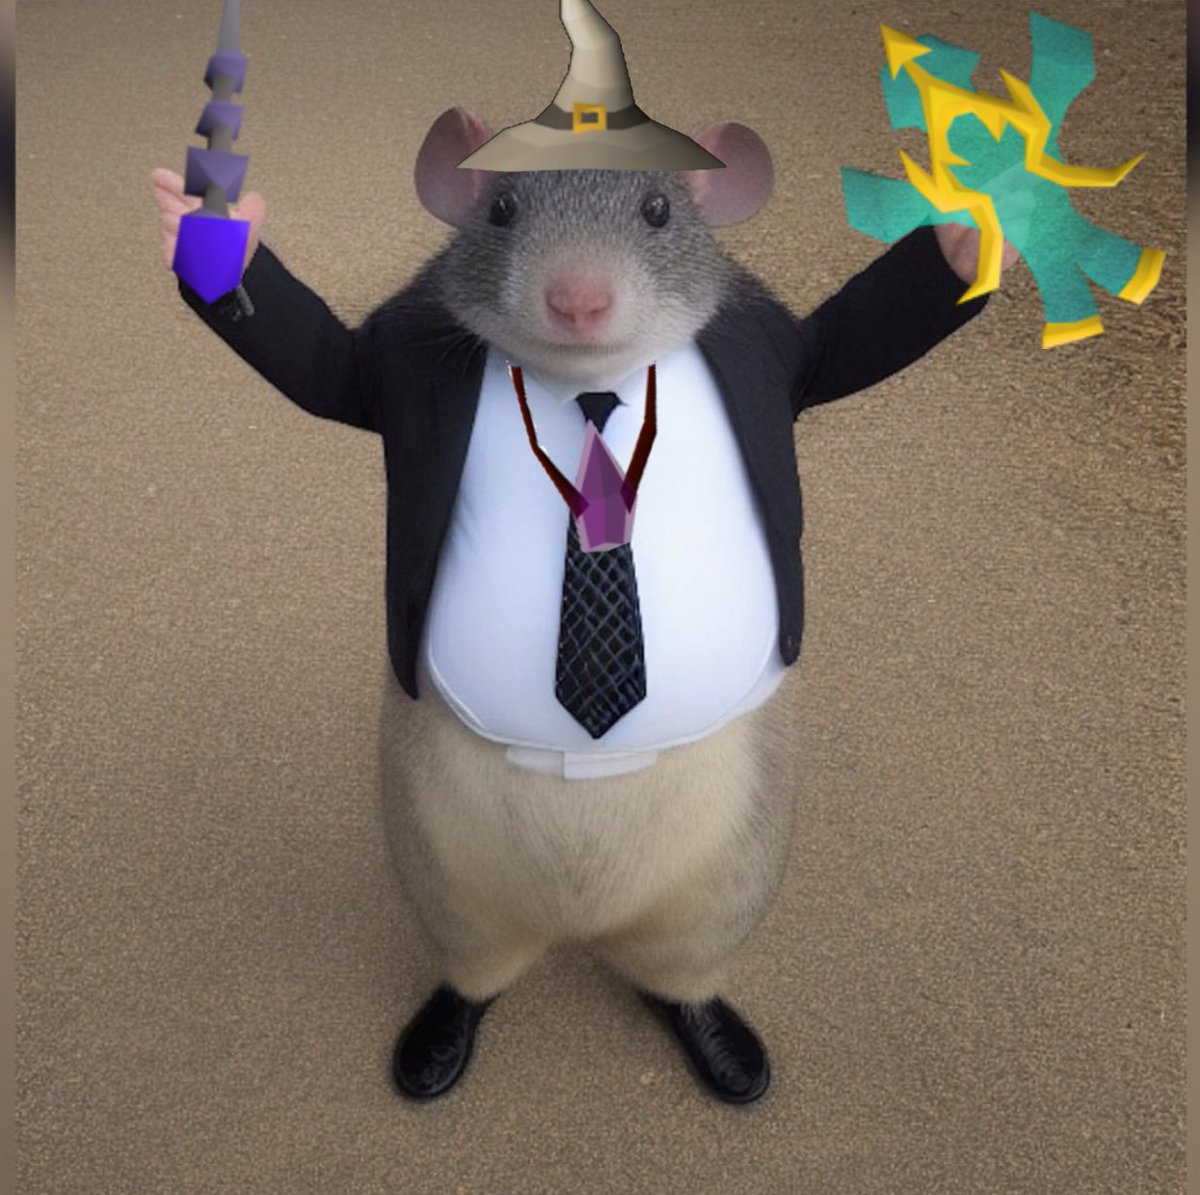 Scurrius, The Rat King - Mid-Level, PvM Boss